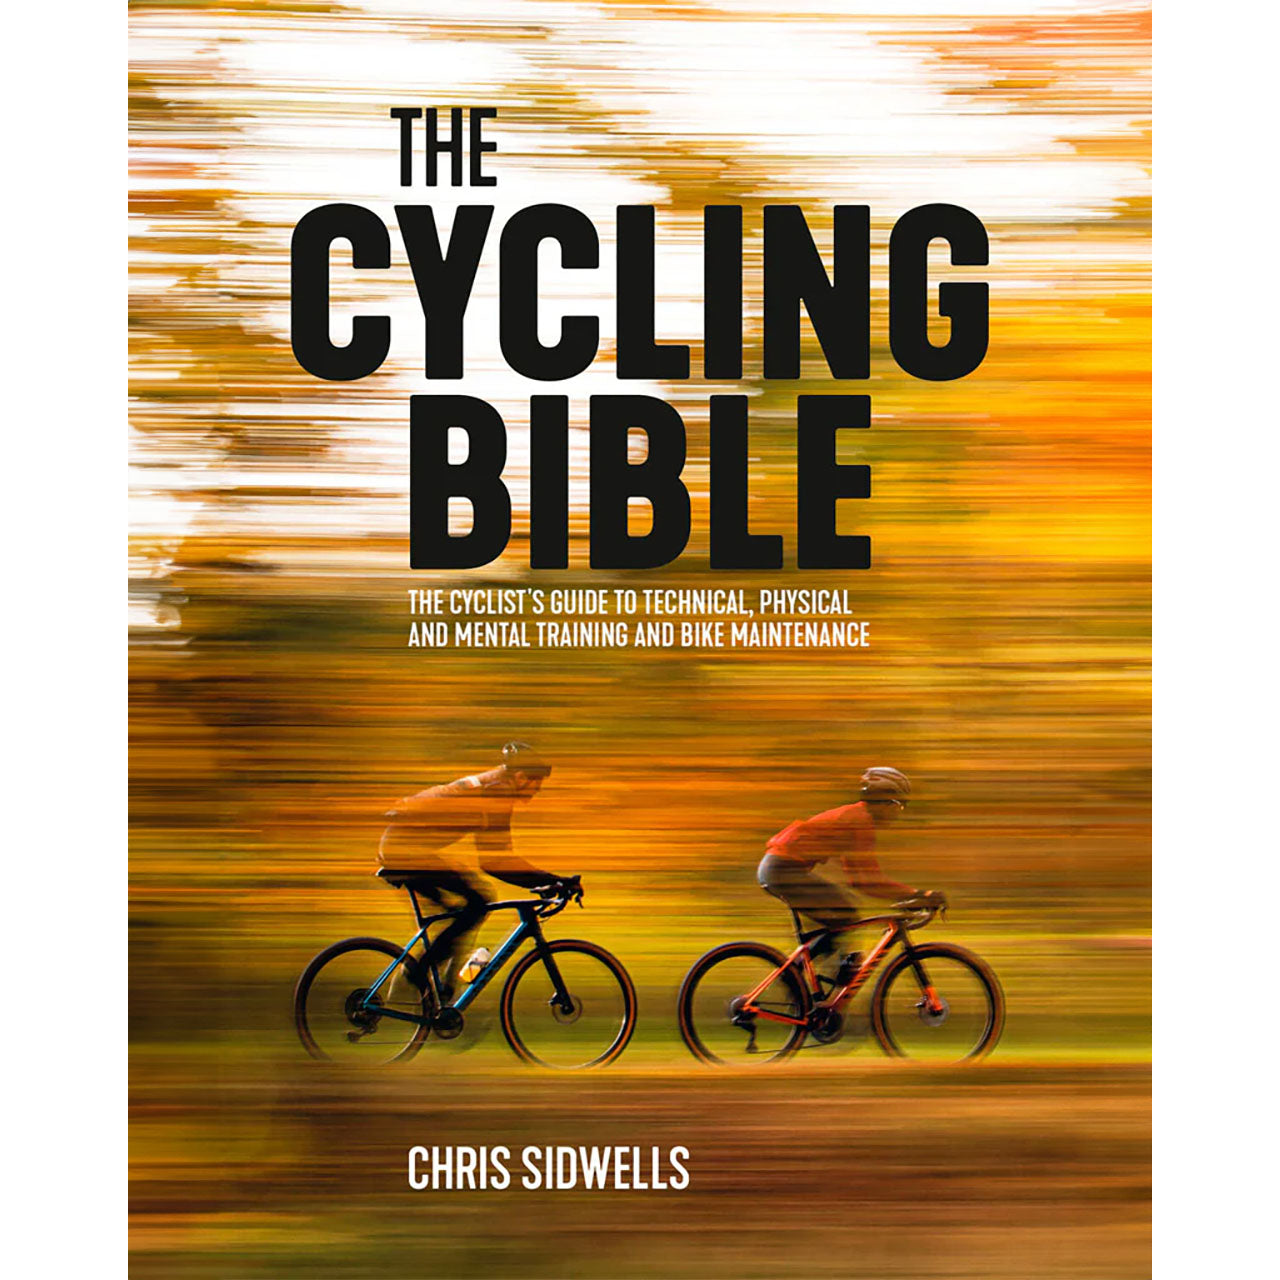 The Cycling Bible by Chris Sidwells